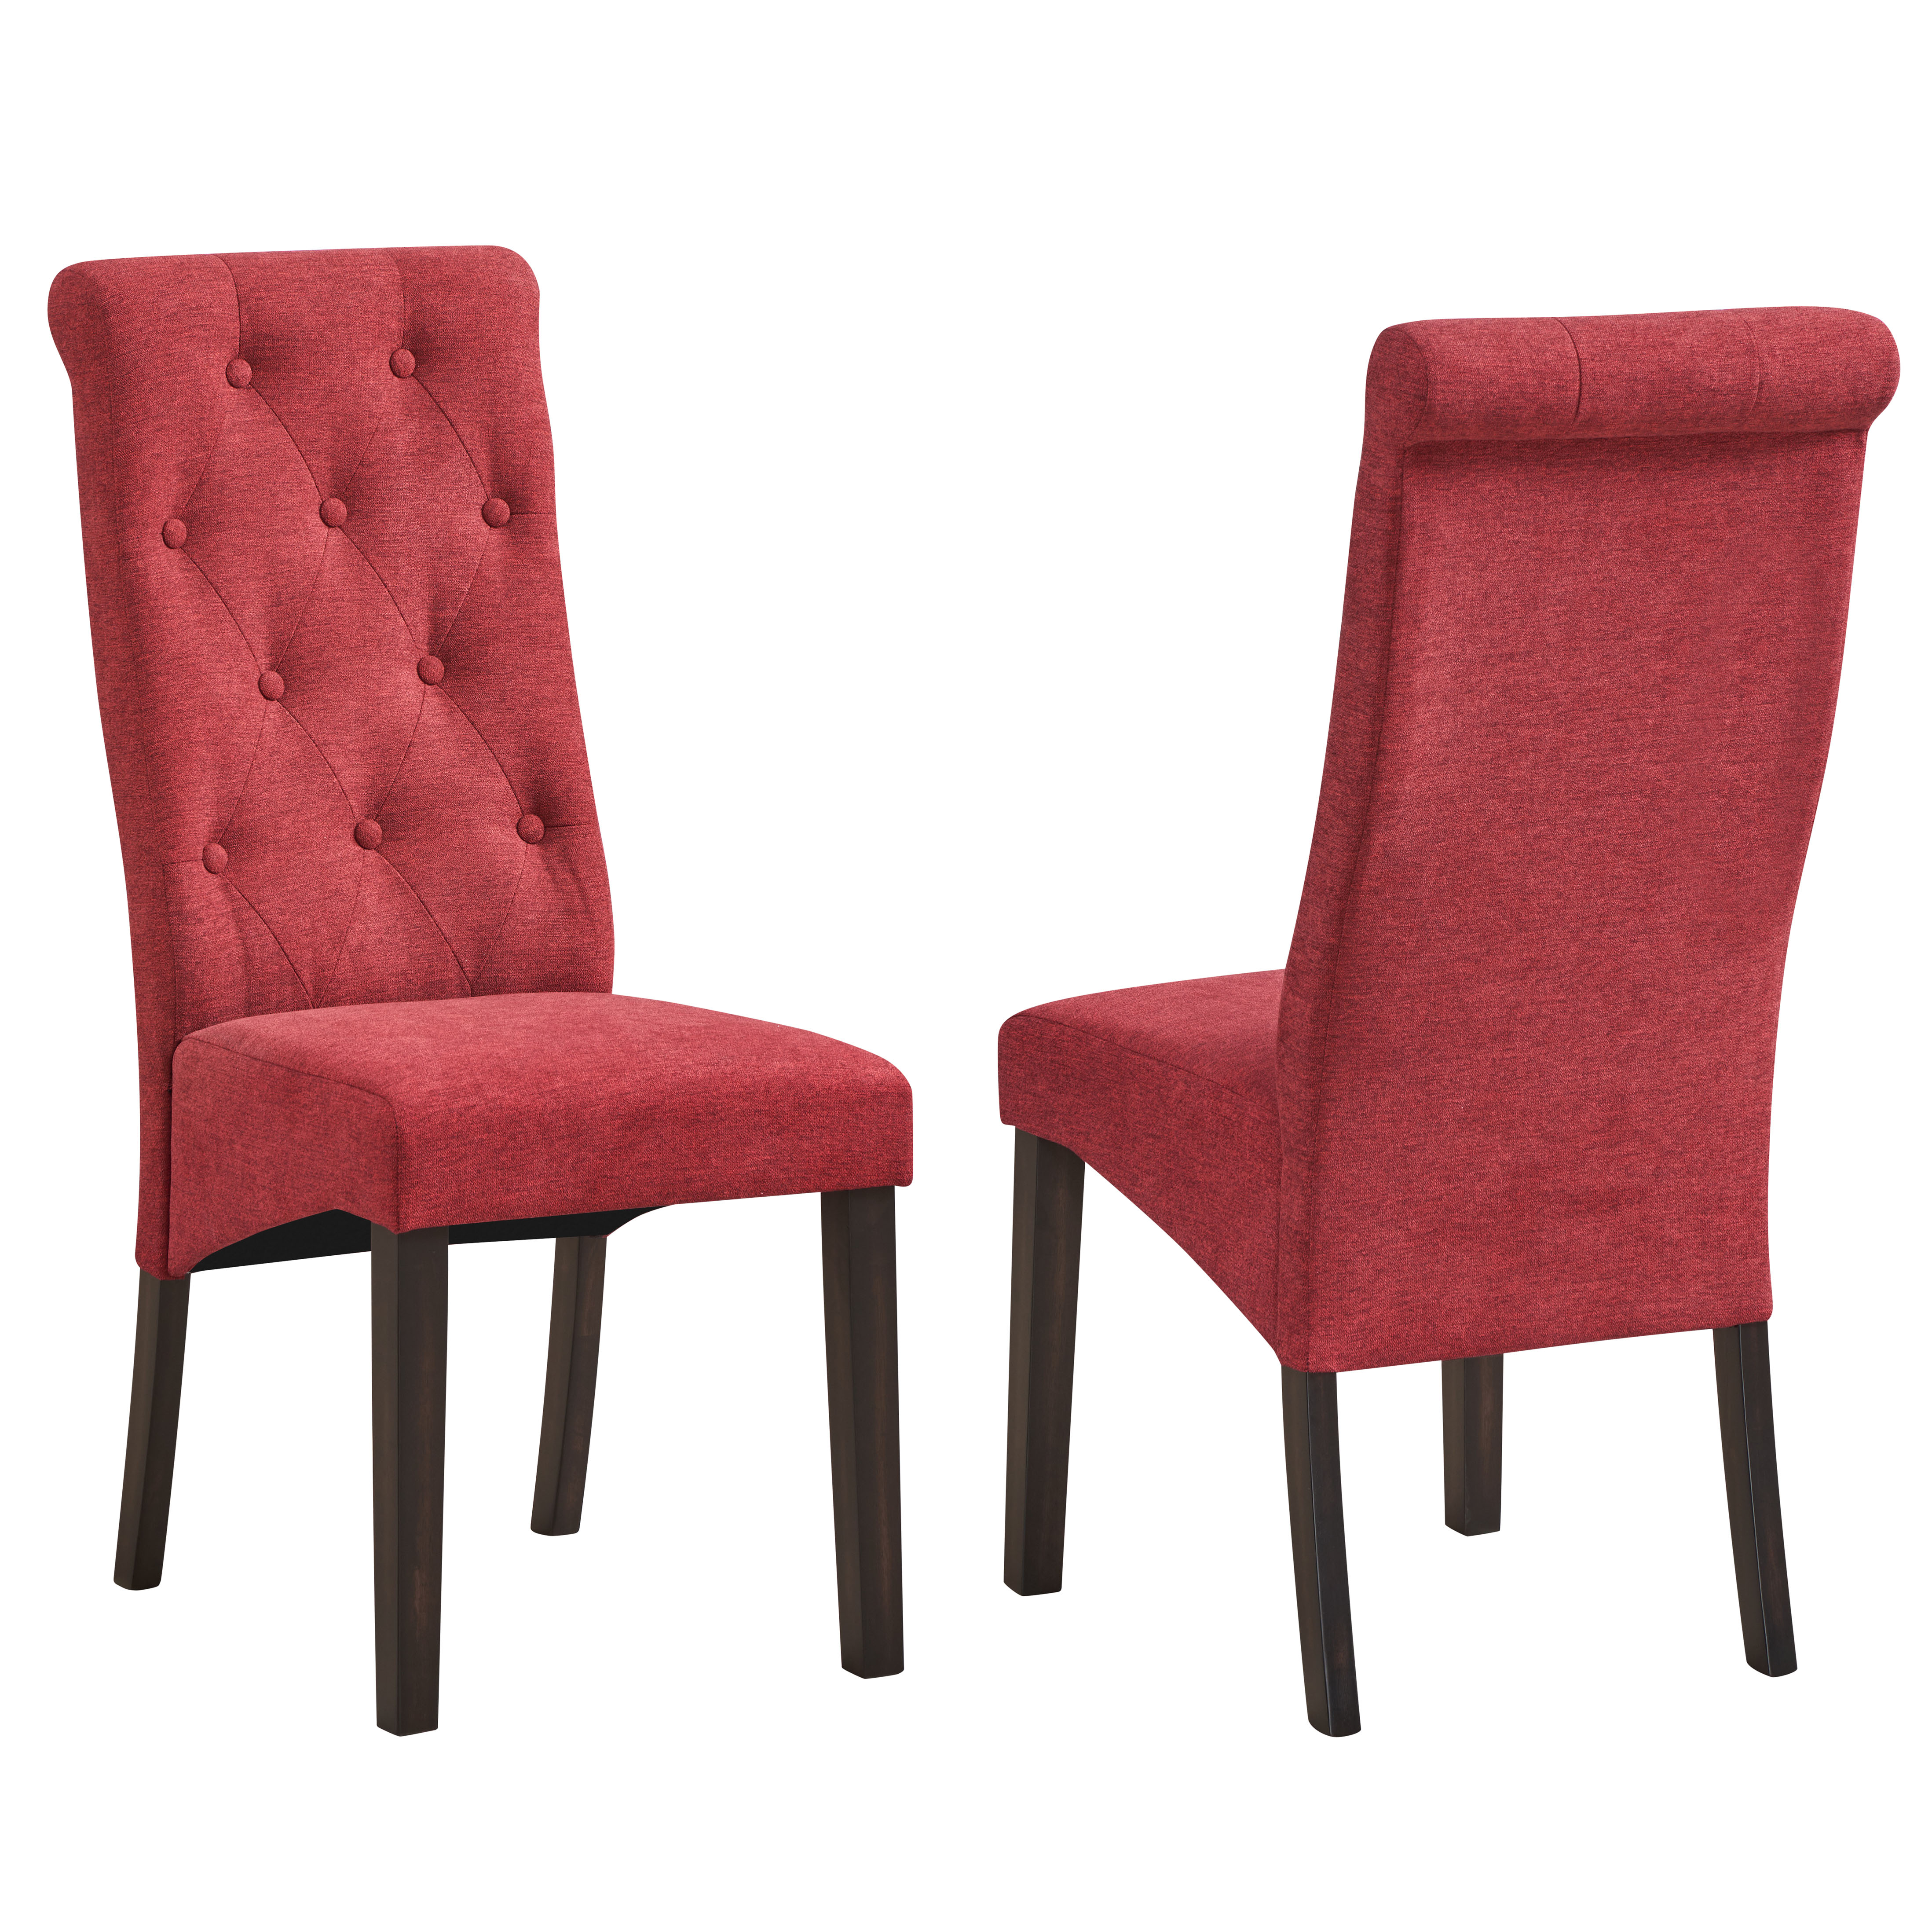 Reno Dining Chairs (Red) - Set of 2